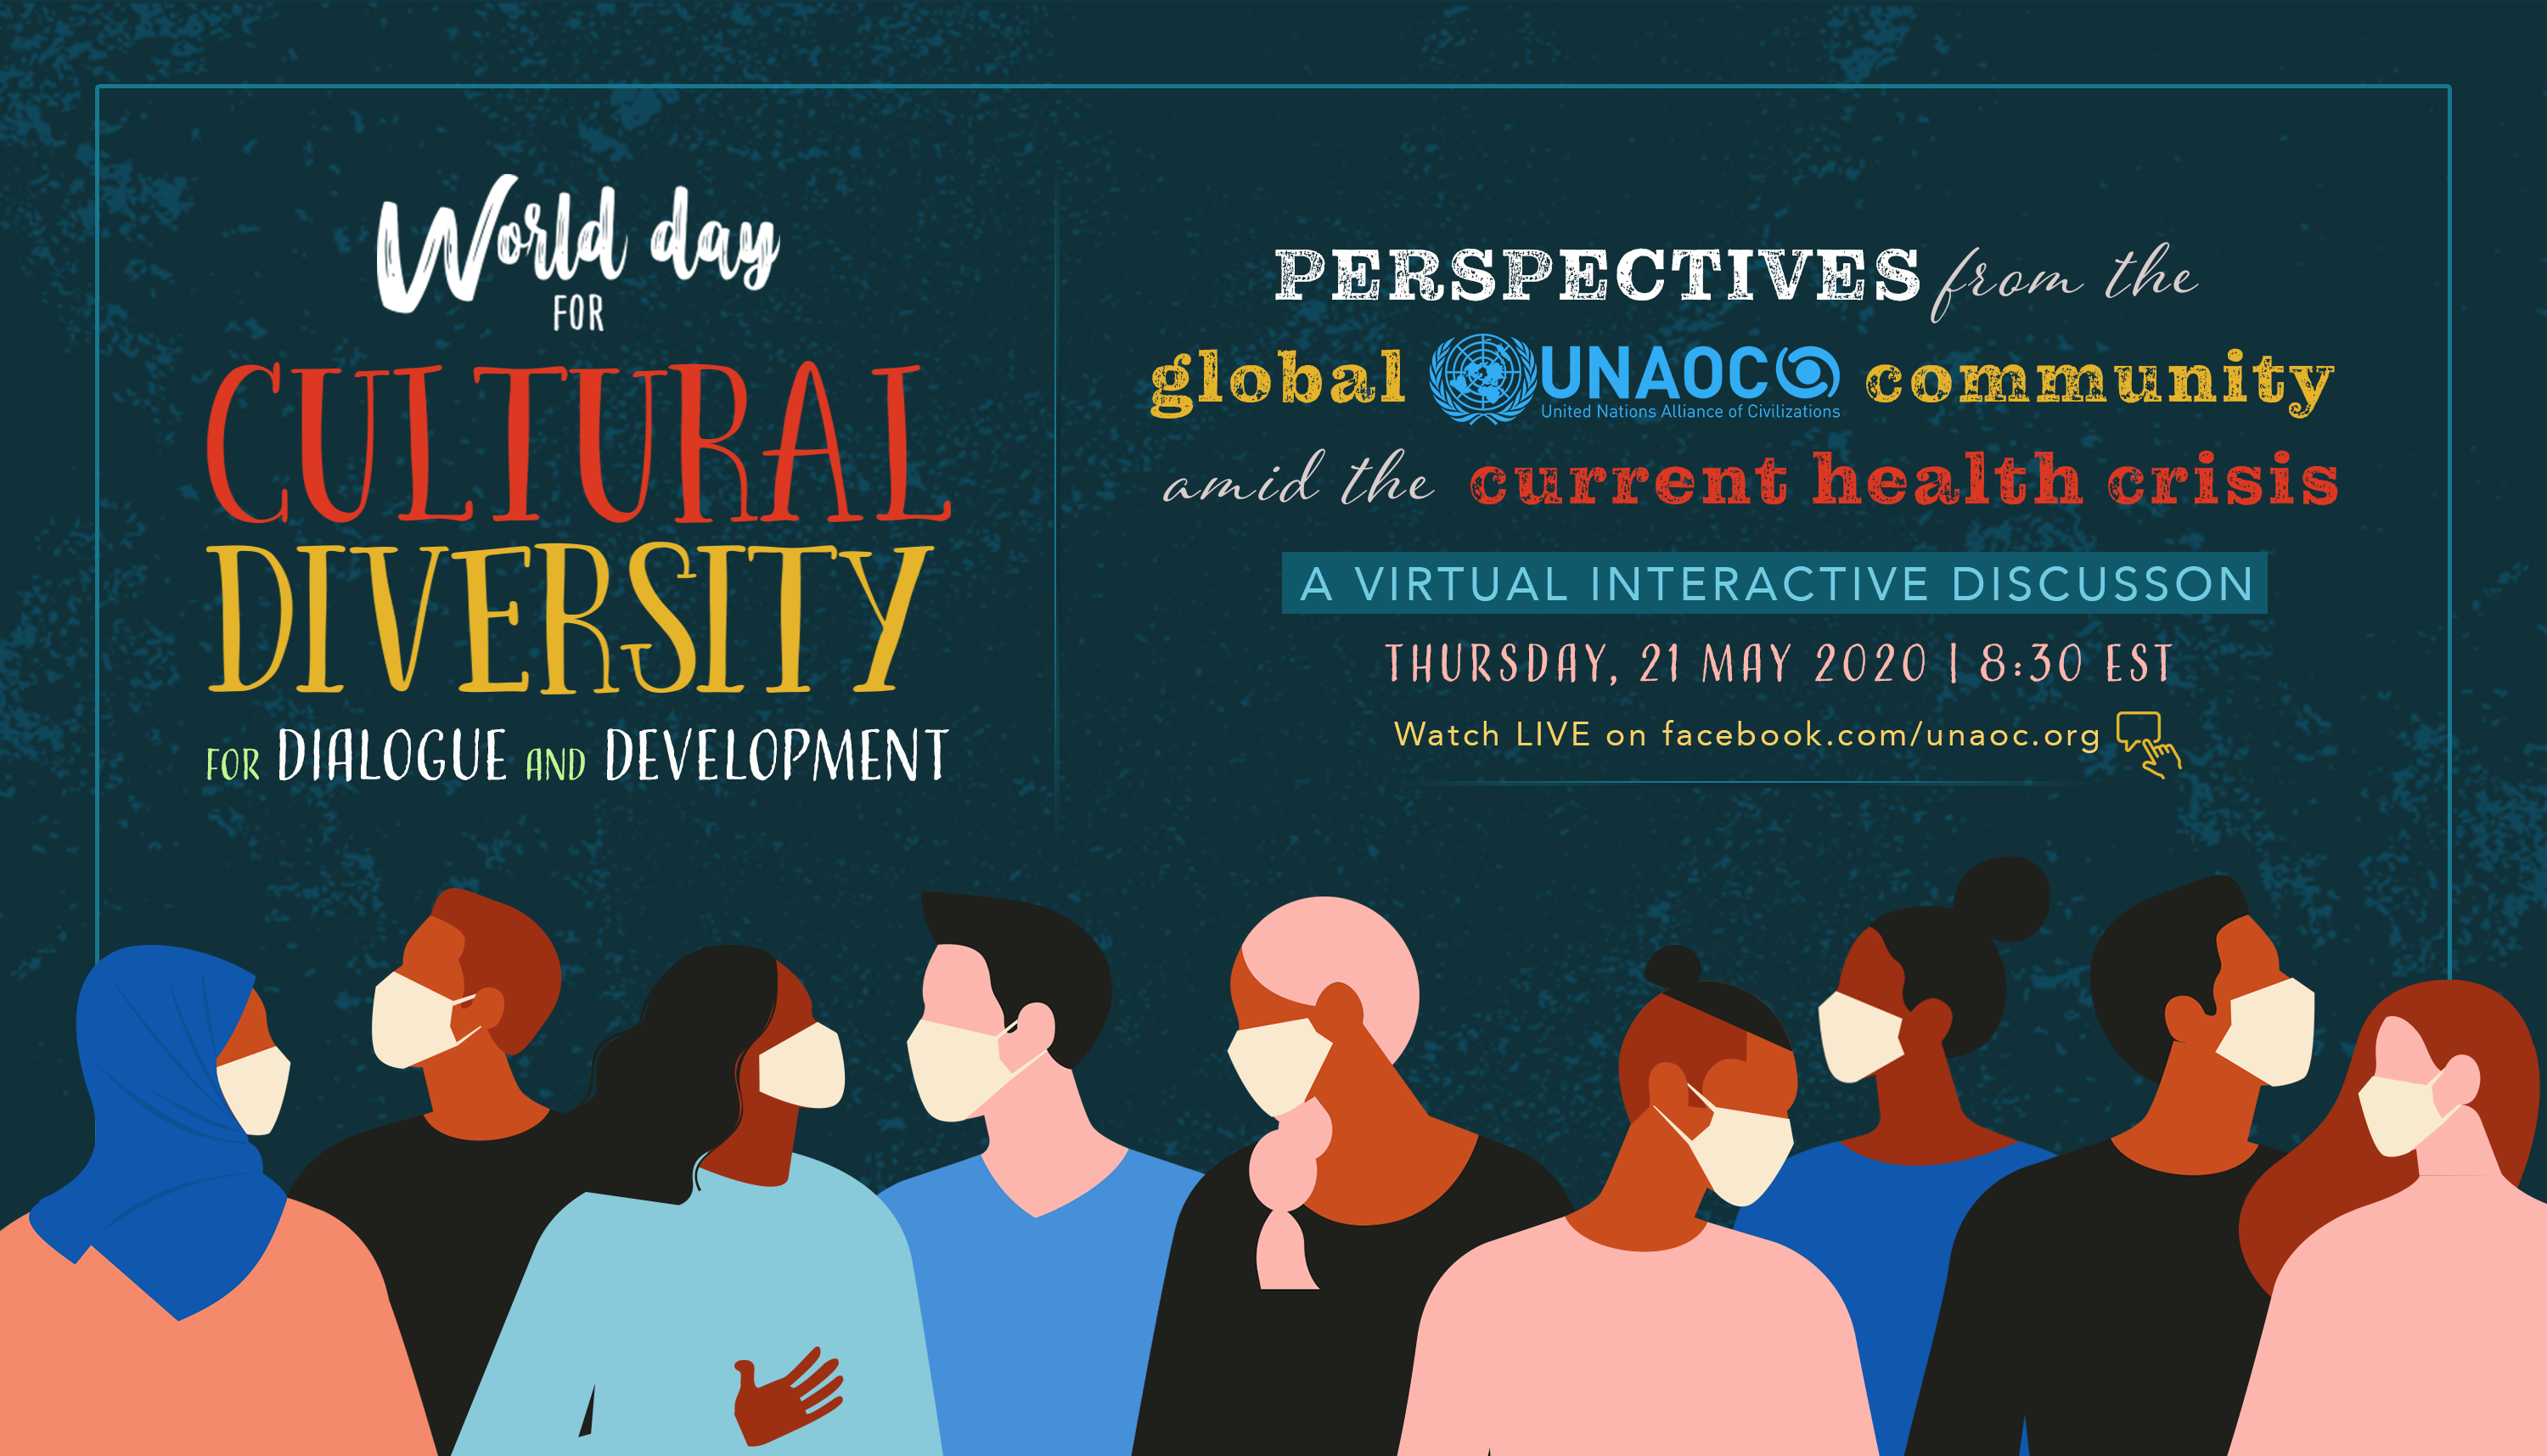 world-day-for-cultural-diversity-for-dialogue-and-development-perspectives-from-the-global